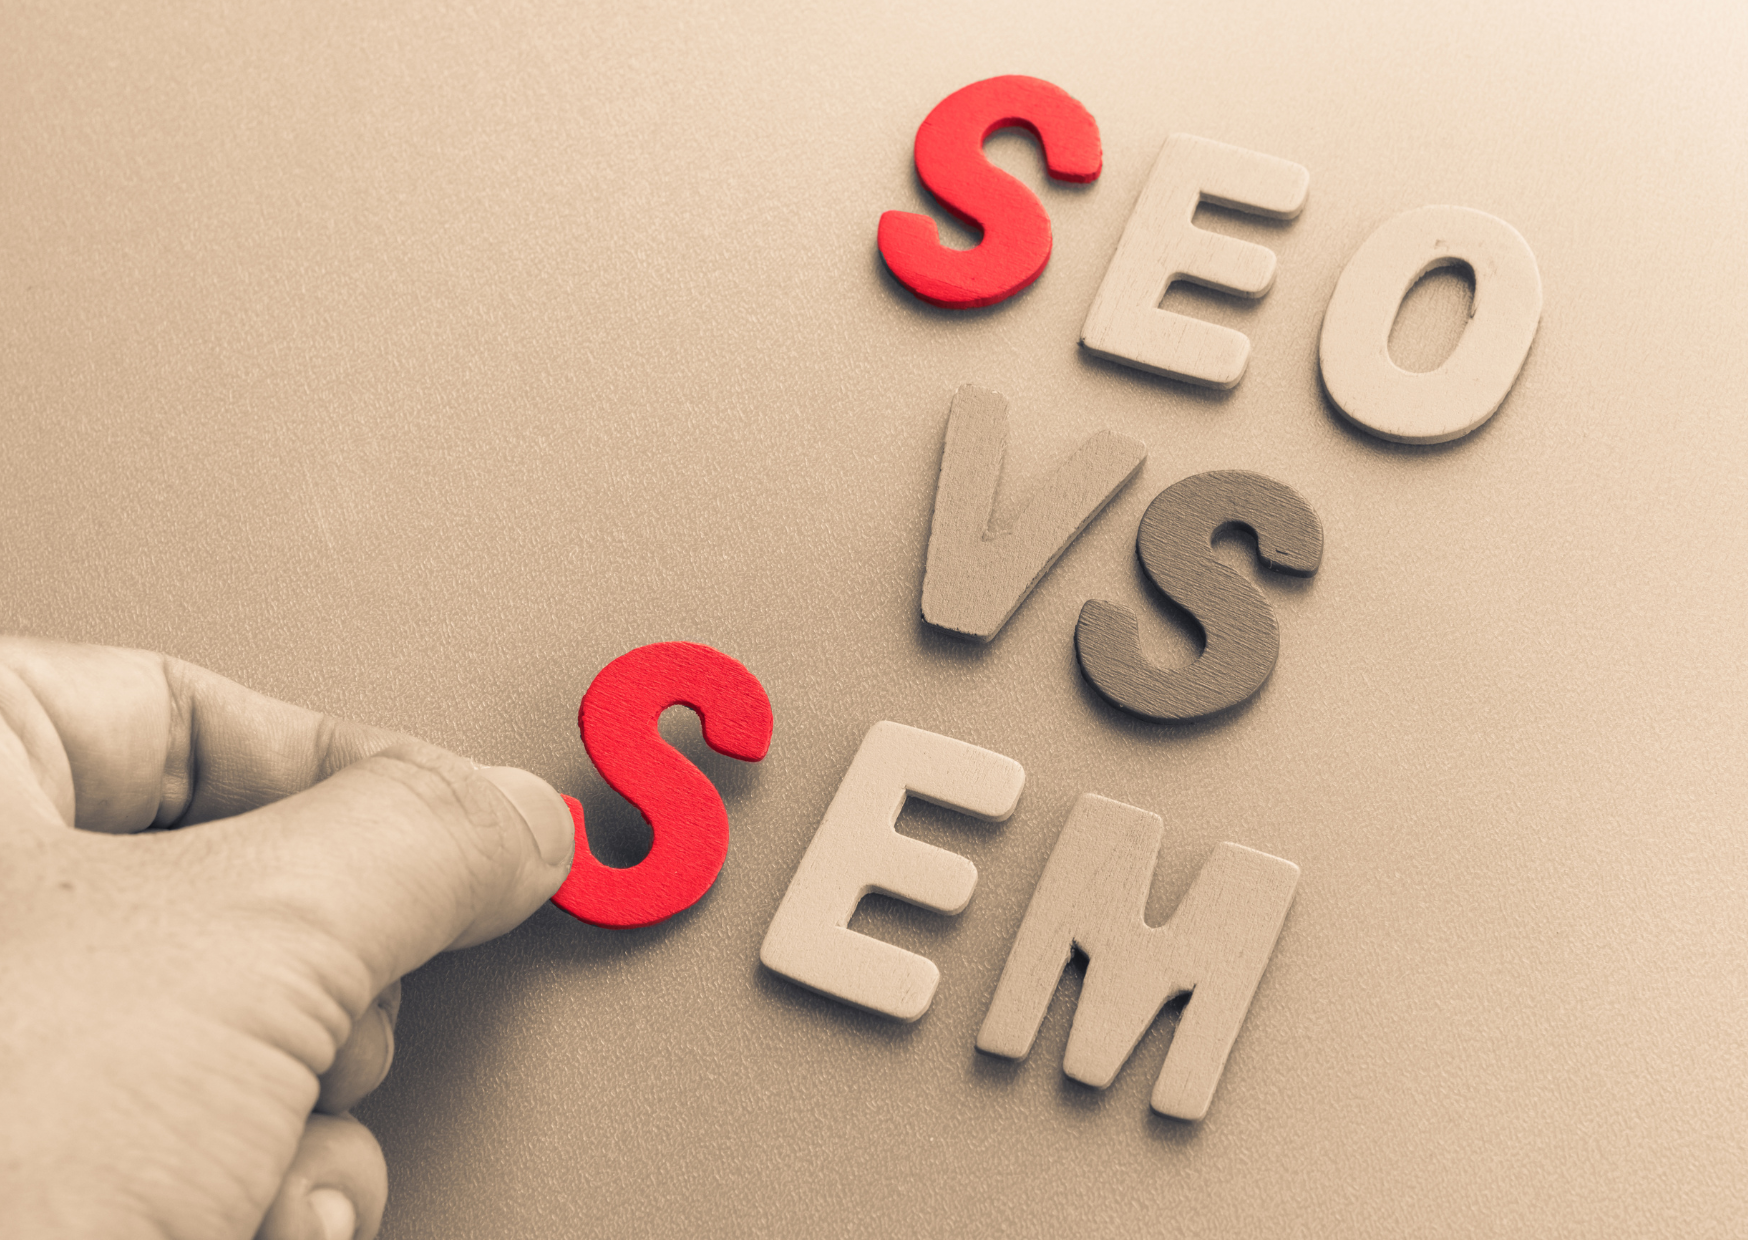 Paid Search vs SEO: What Works Better for Car Dealerships?